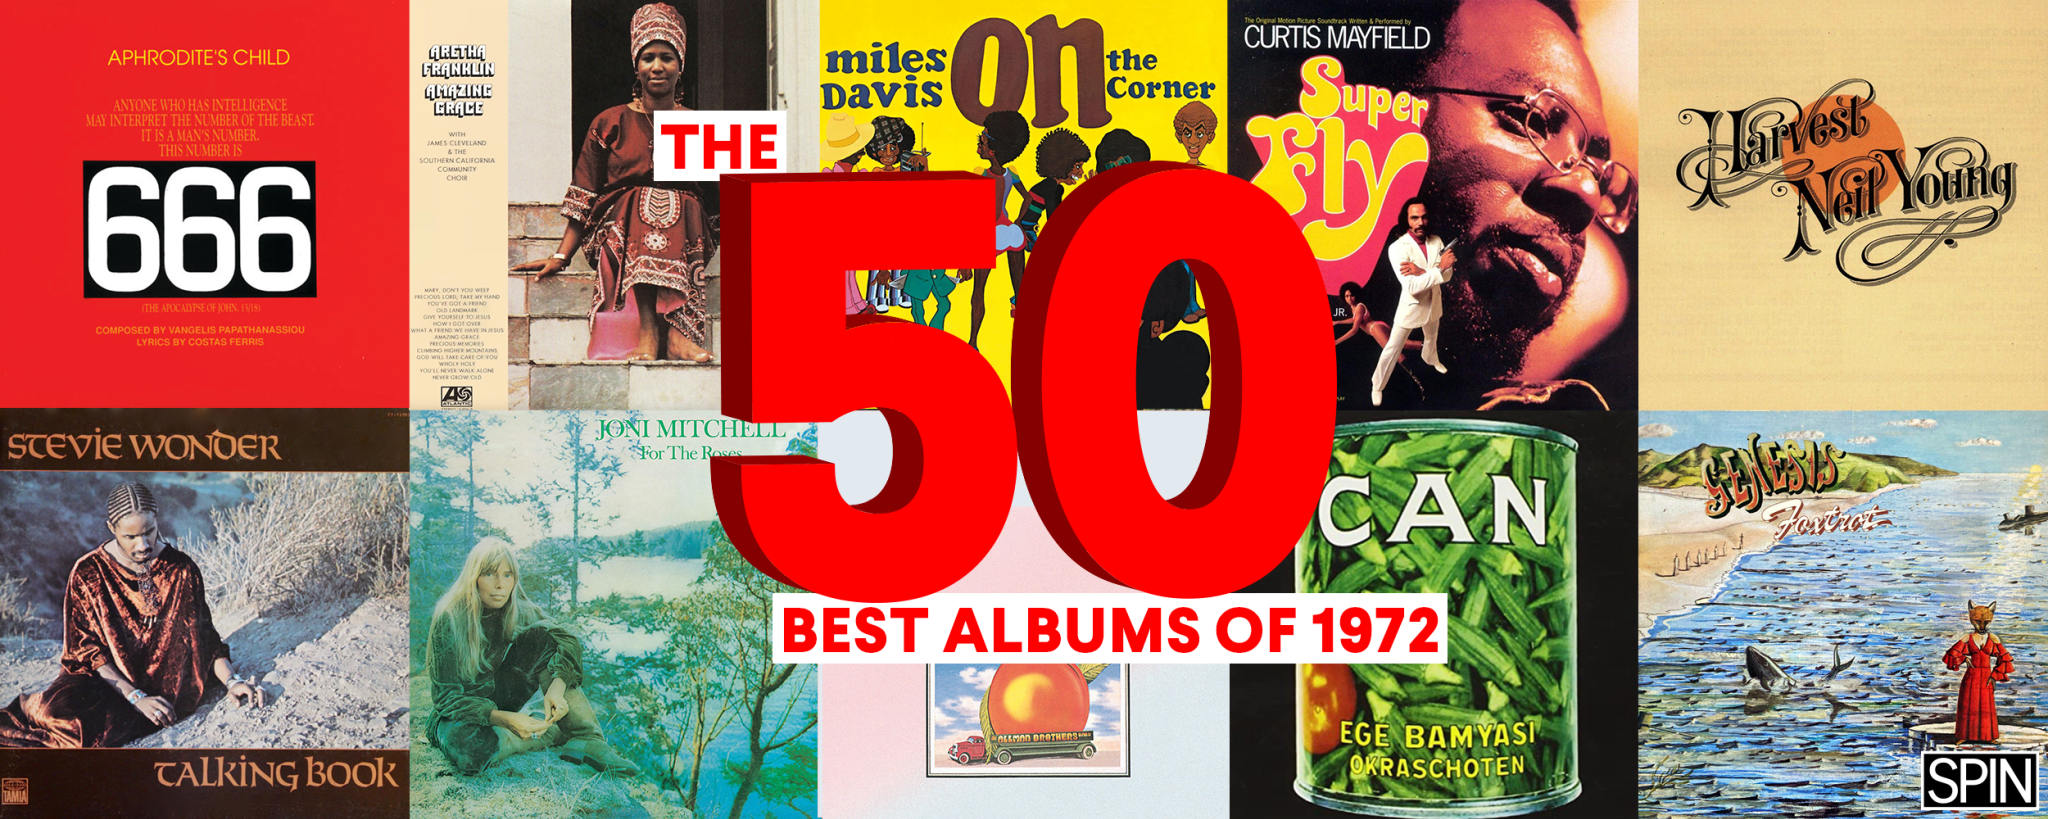 The 50 Best Albums of 1972